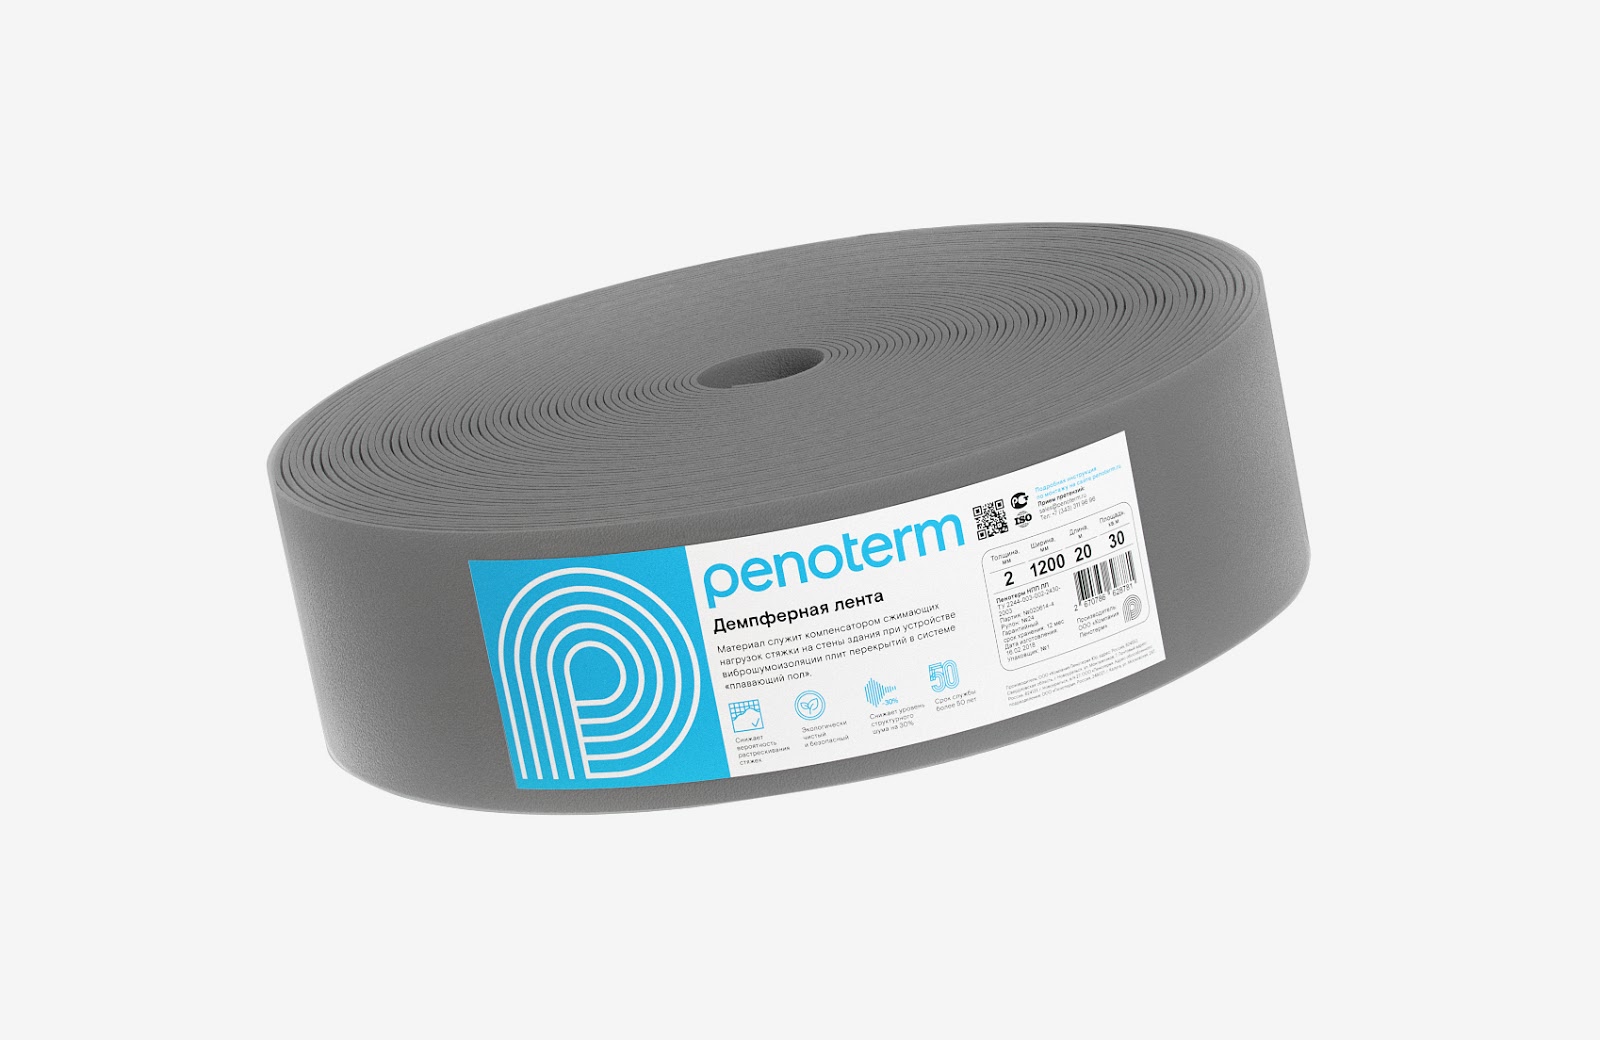 Penoterm Insulation Products Redesigned On Packaging Of